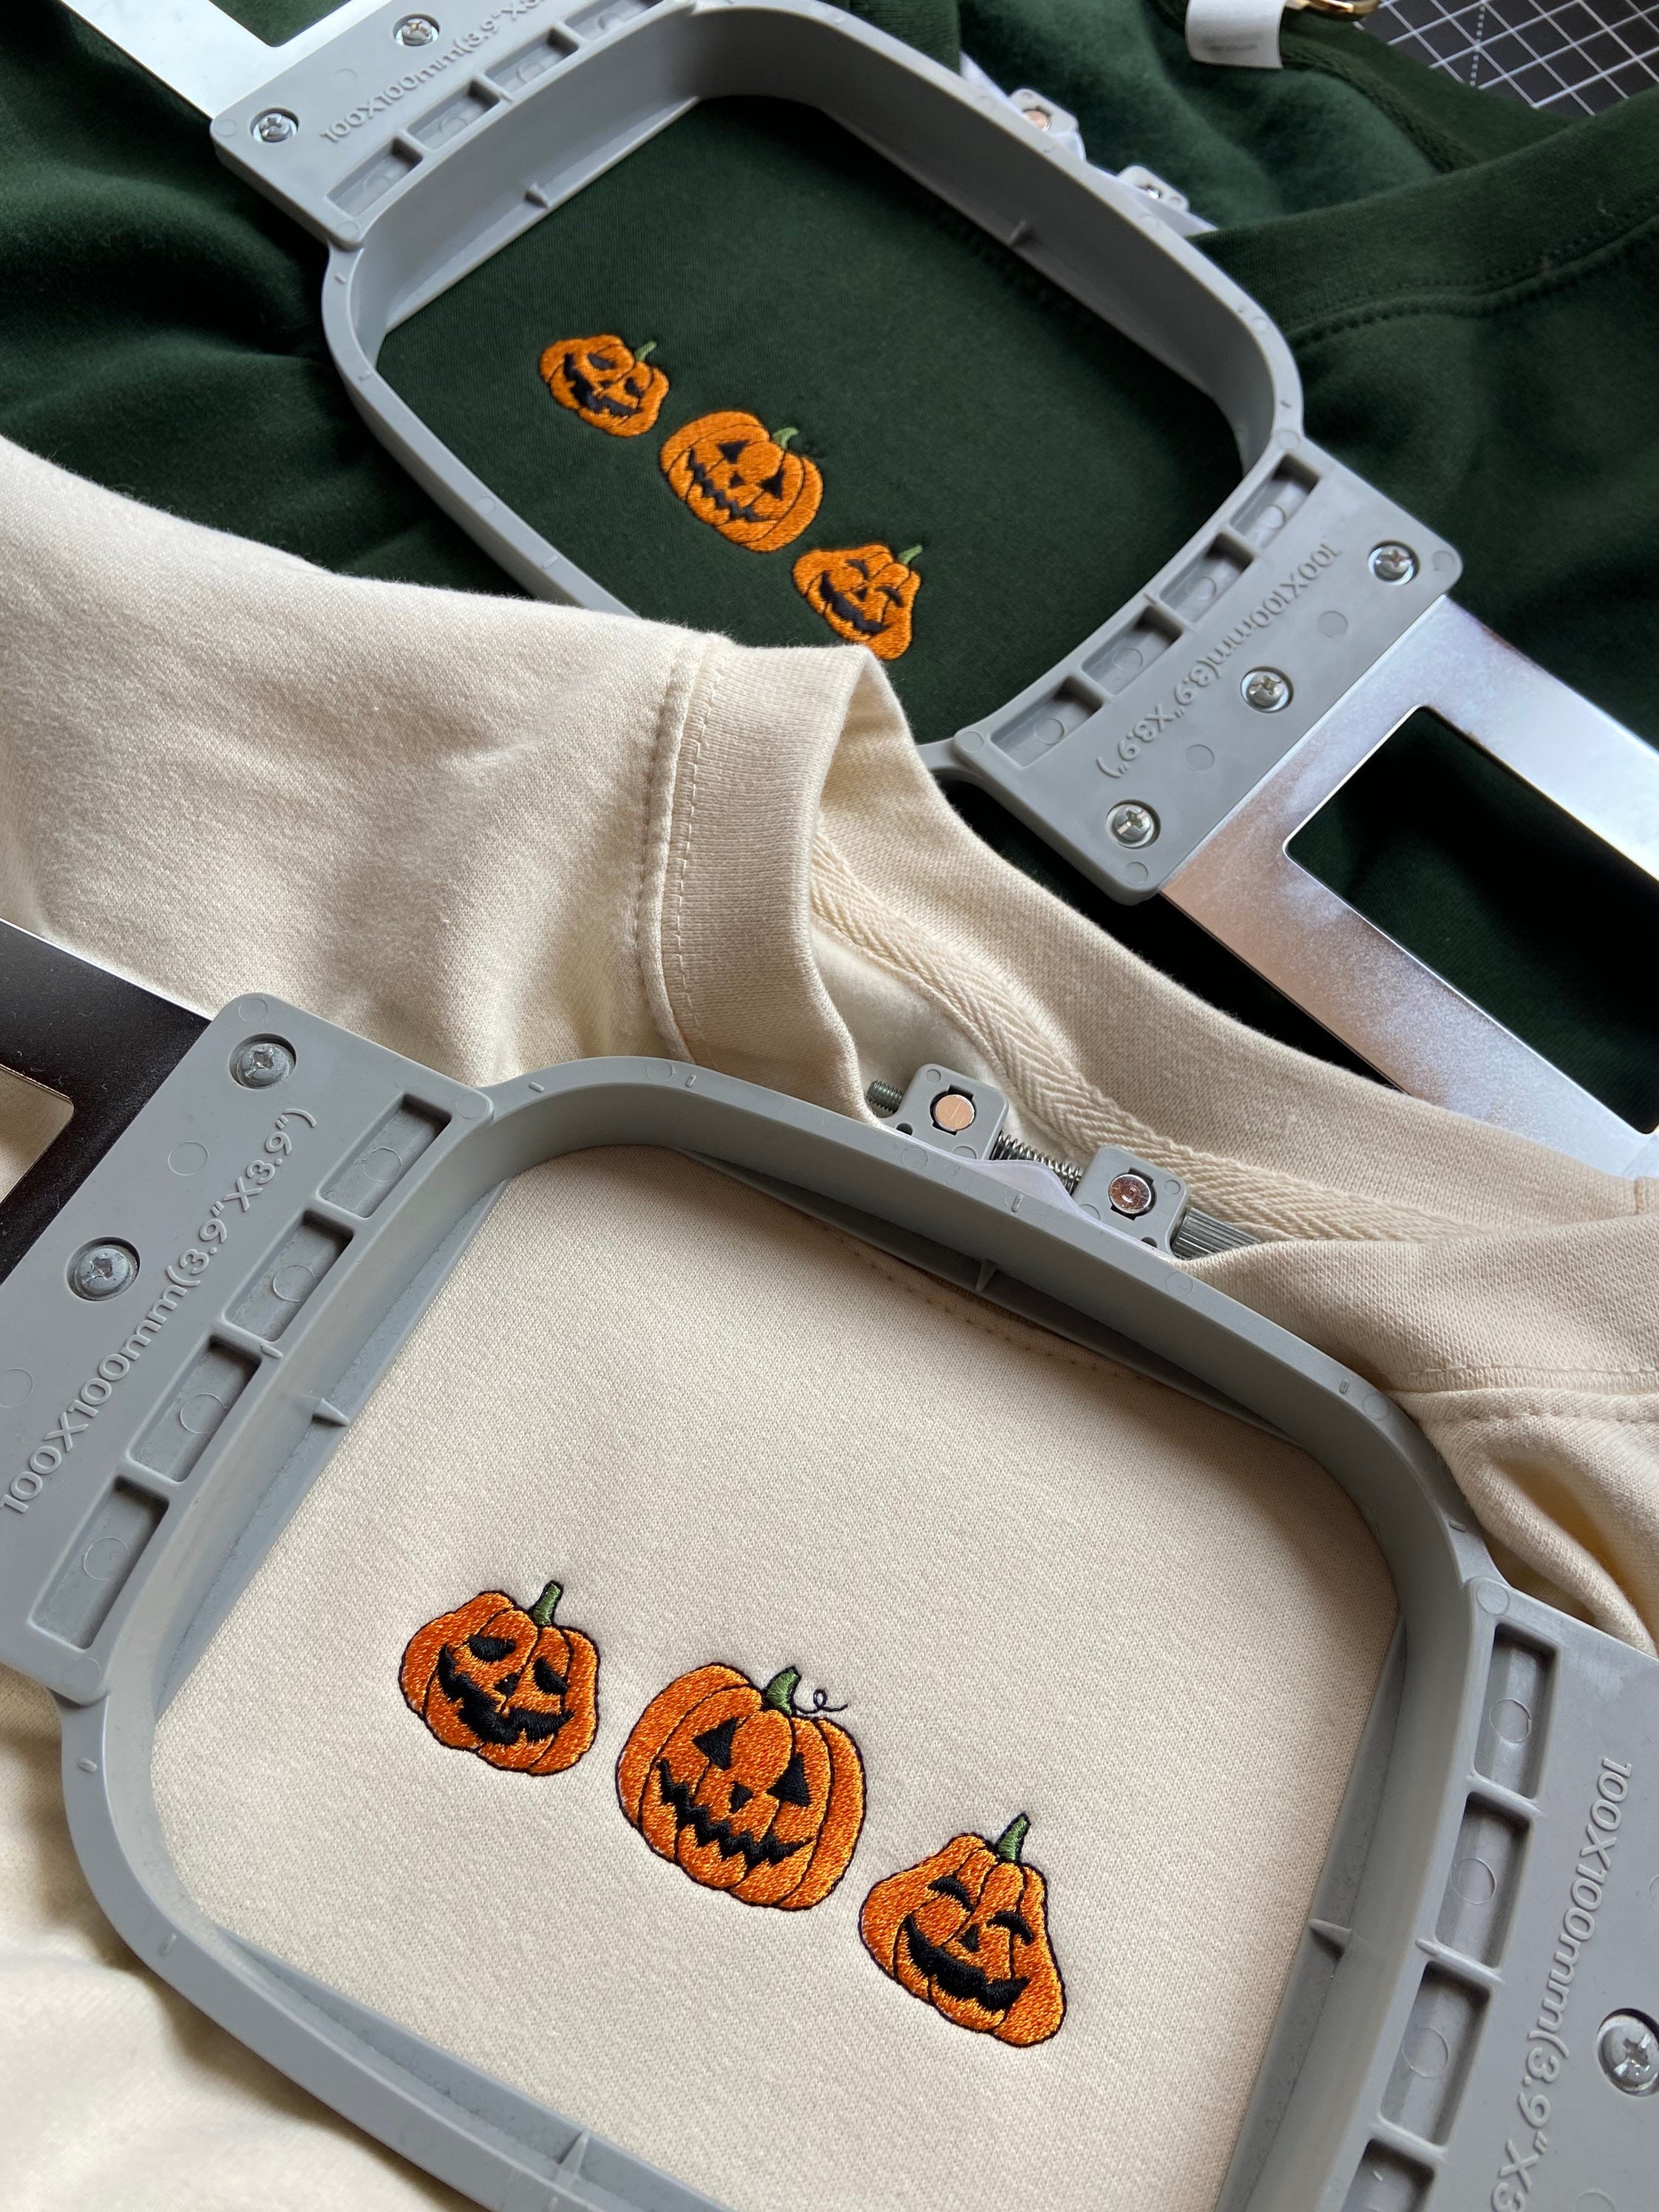 Discover Pumpkin Face Embroidered Sweatshirt, Halloween, Autumn Clothing, Embroidery, Fall Sweater, Eco Jumper, Unisex, Halloween Costume, Pumpkins